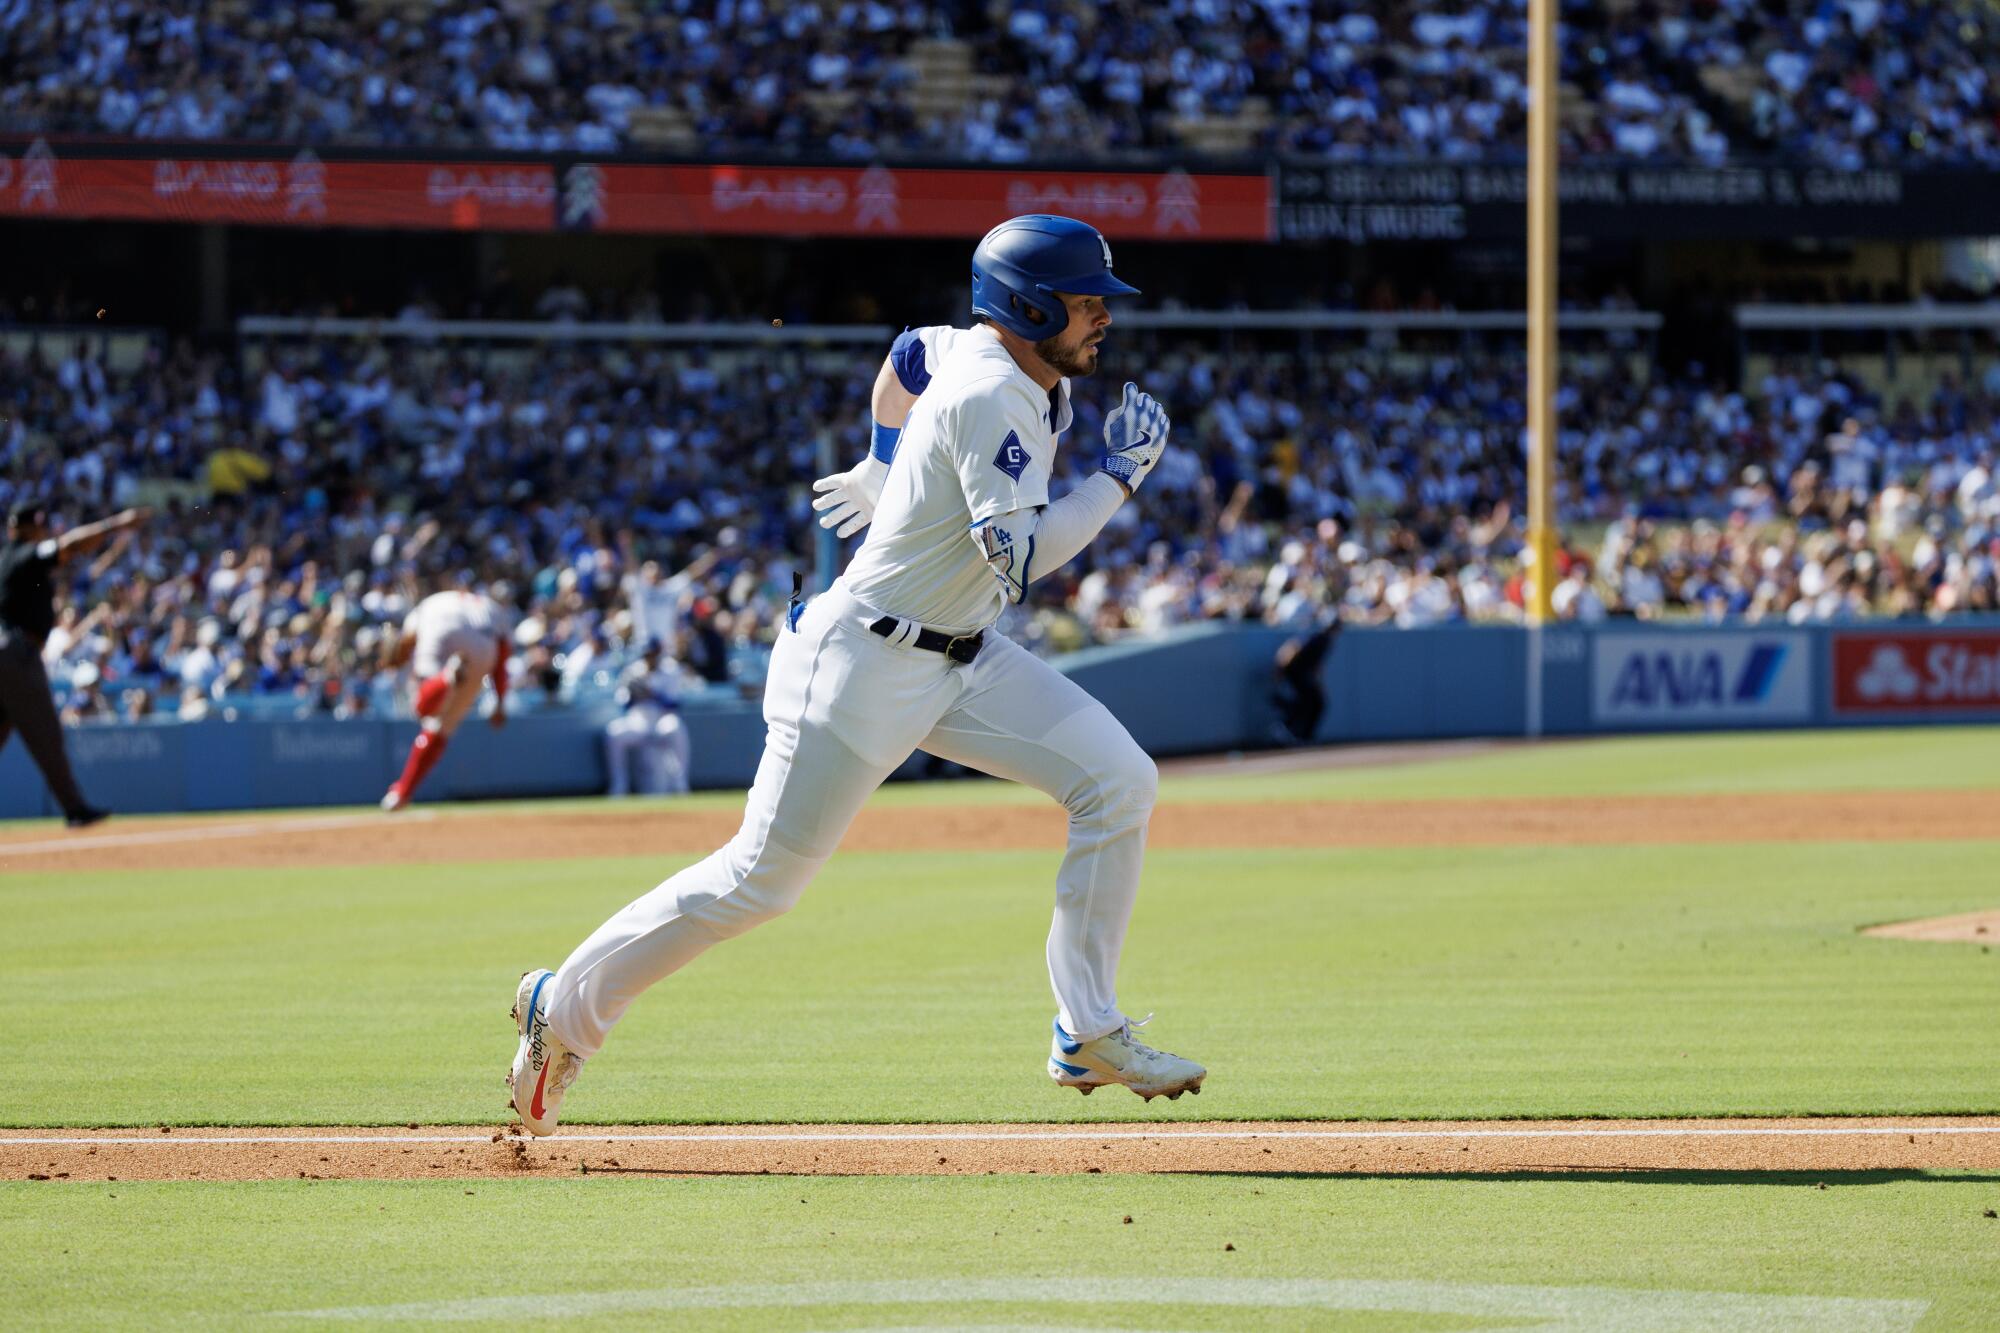 Gavin Lux sprints after hitting a double in the Dodgers' 9-6 win over the Boston Red Sox at Dodger Stadium.